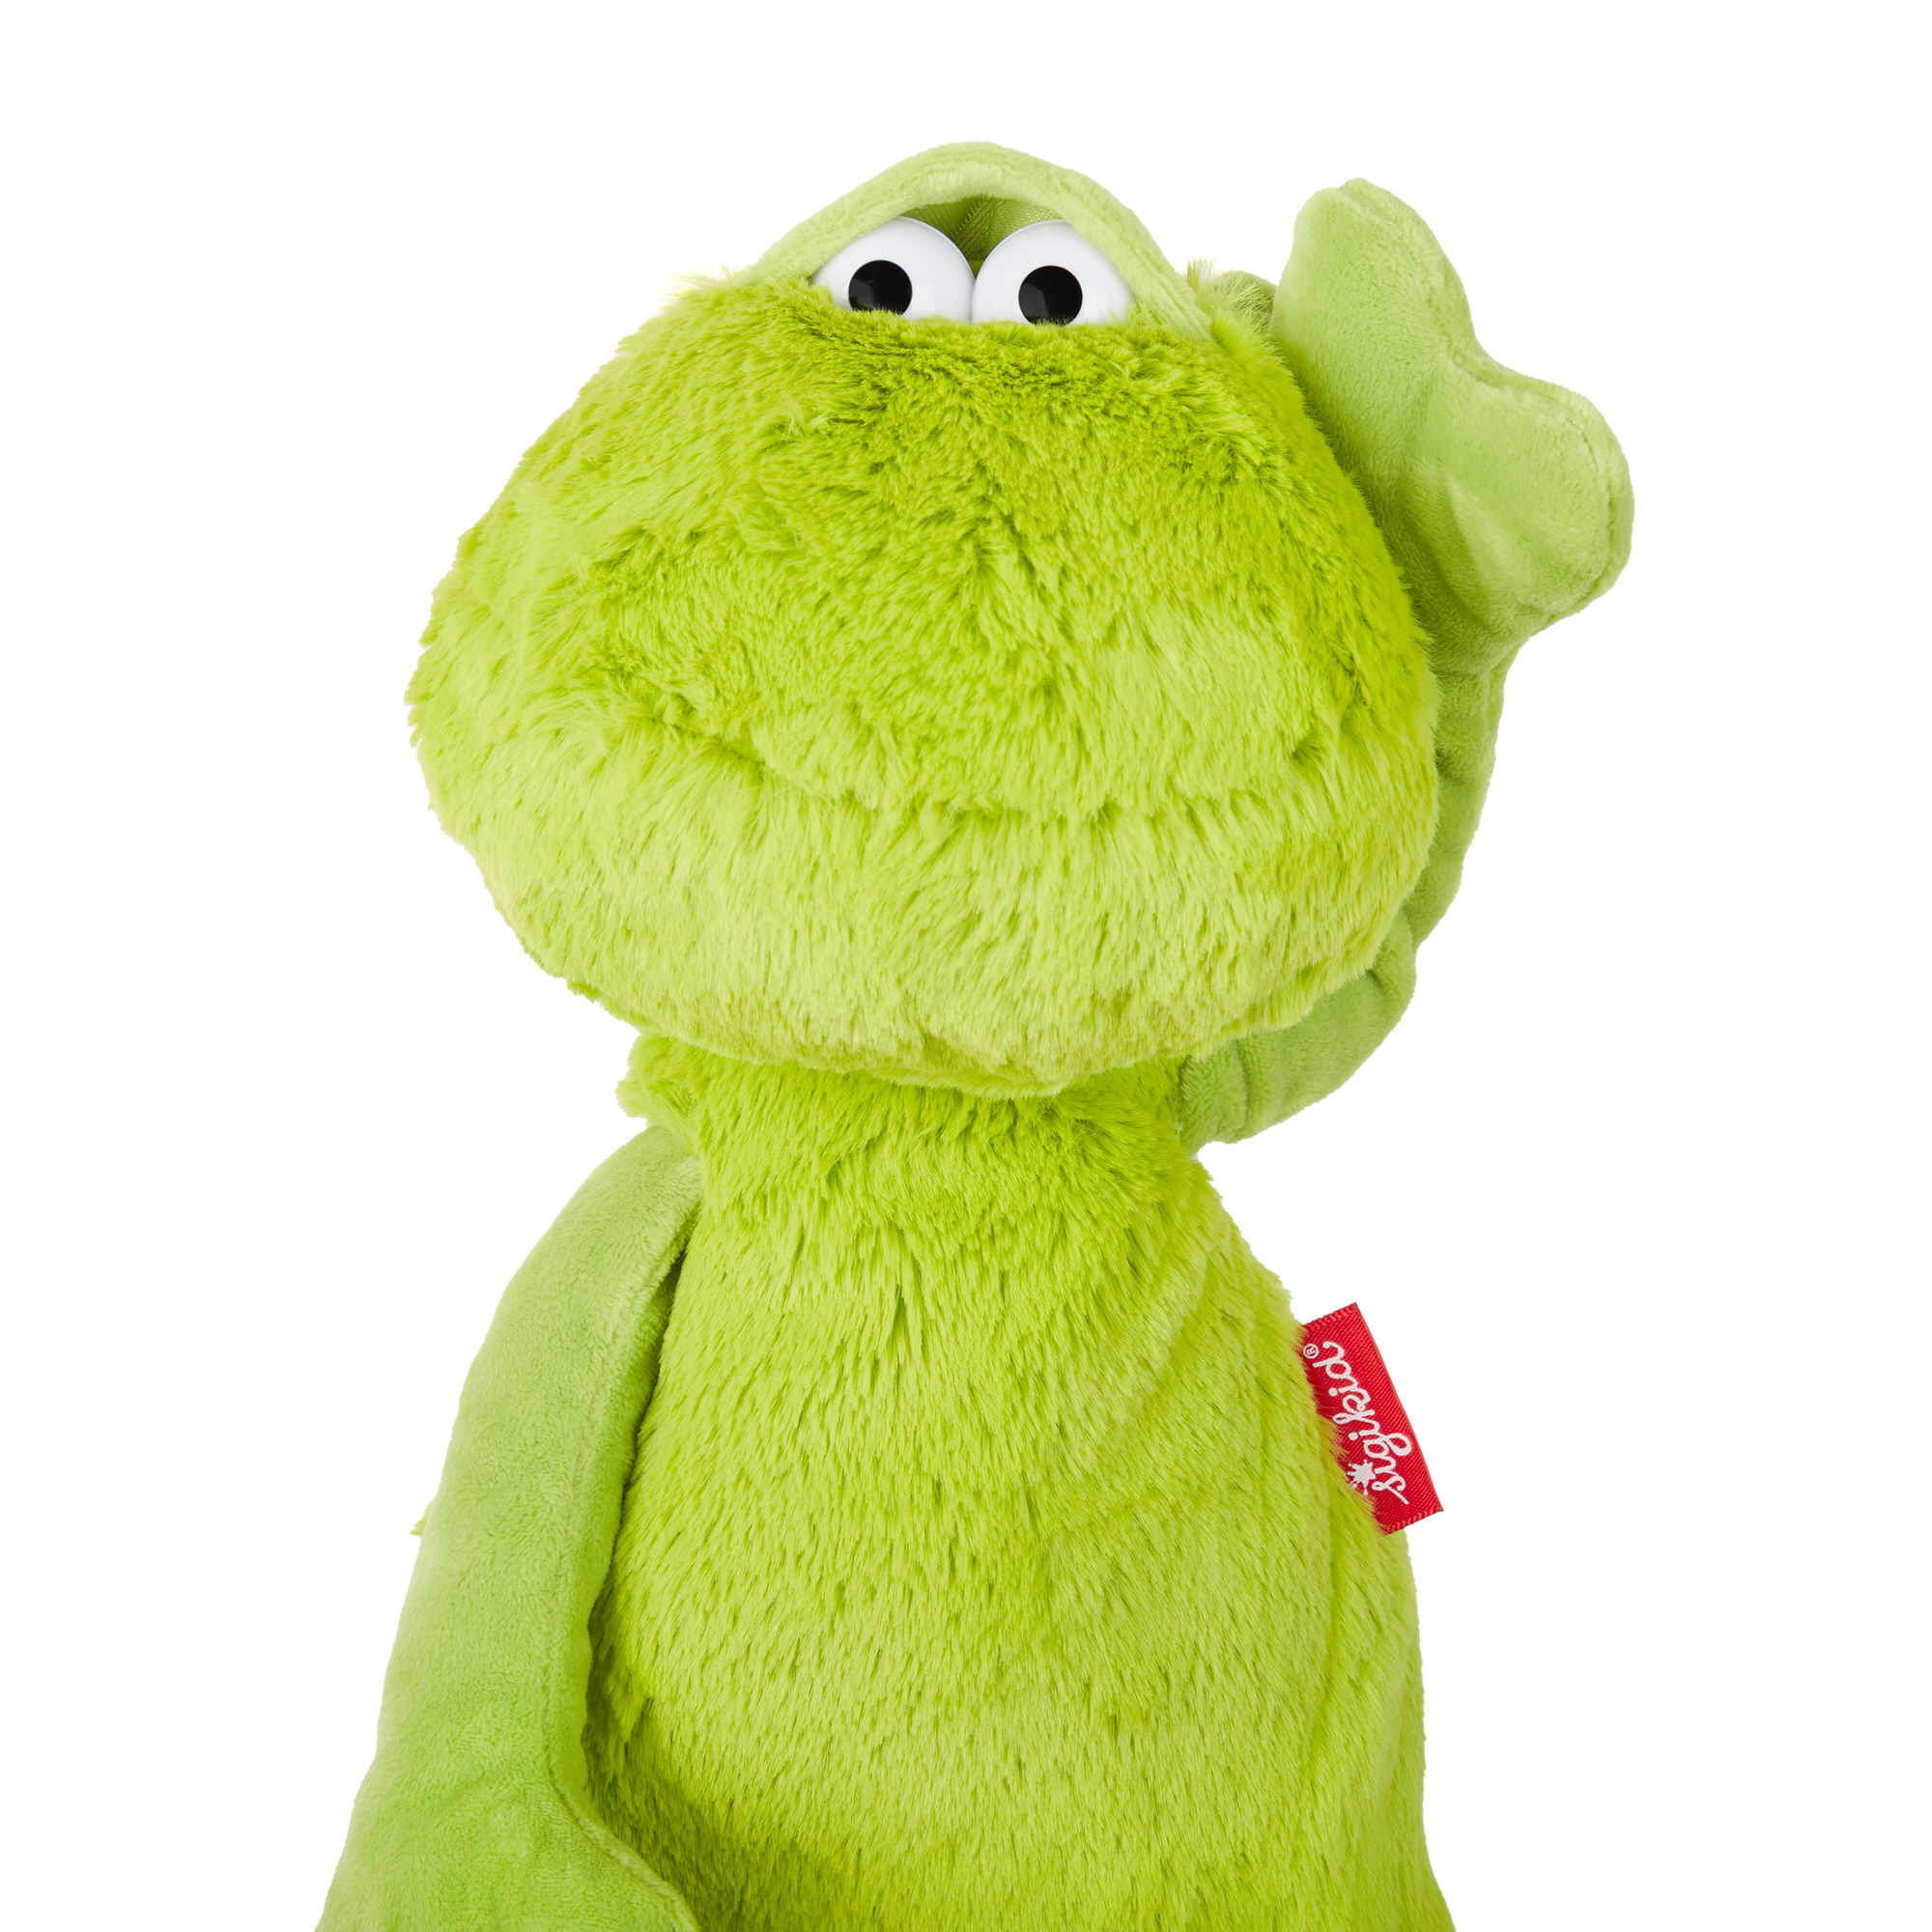 "Express your mood" plush frog